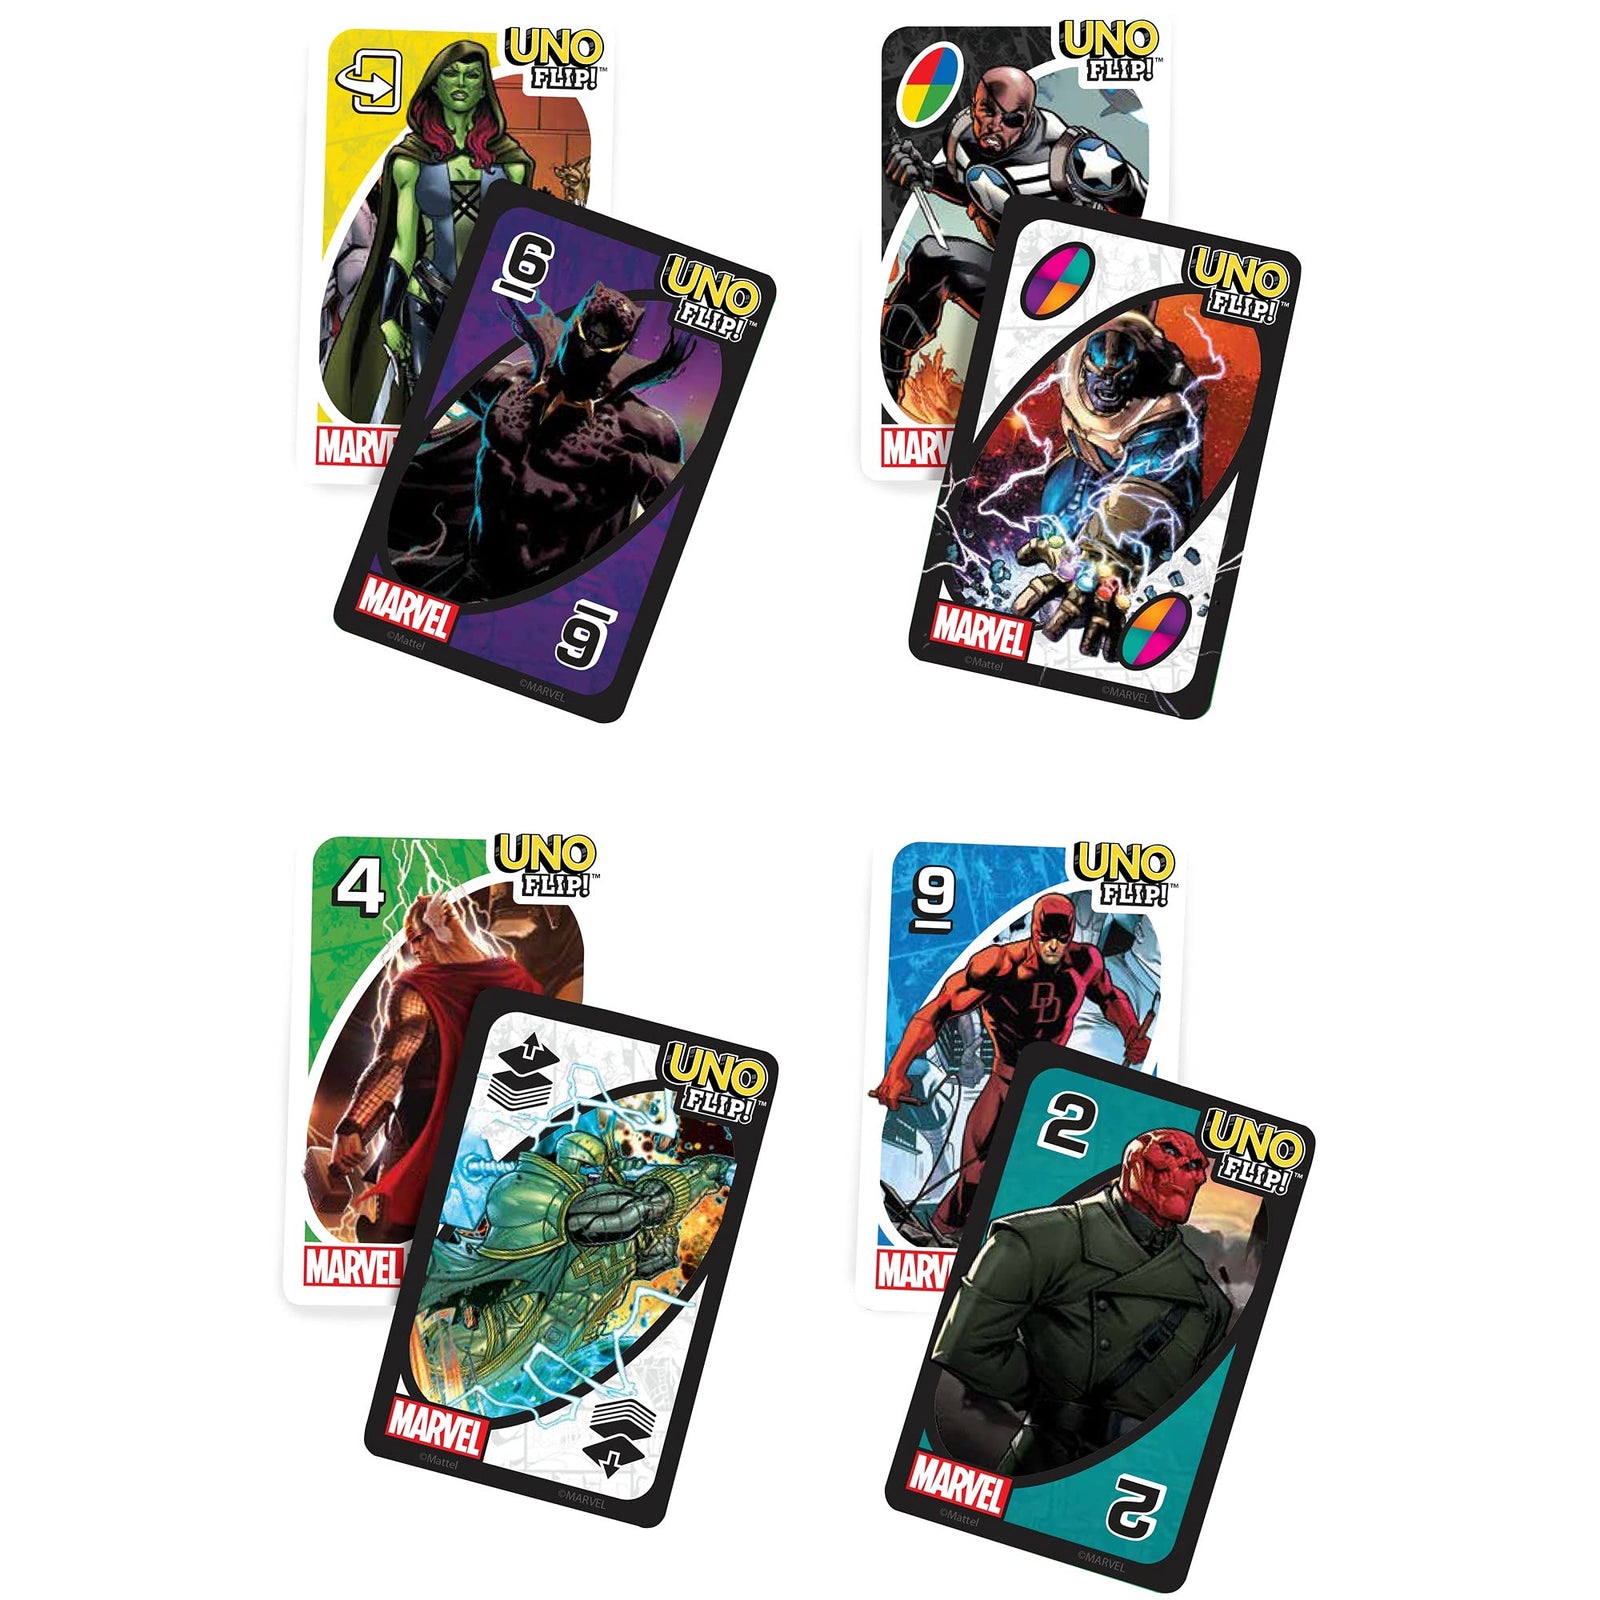 UNO FLIP Marvel Card Game with 112 Cards, Gift for Kid, Family & Adult Game Night for Players 7 Years & Older